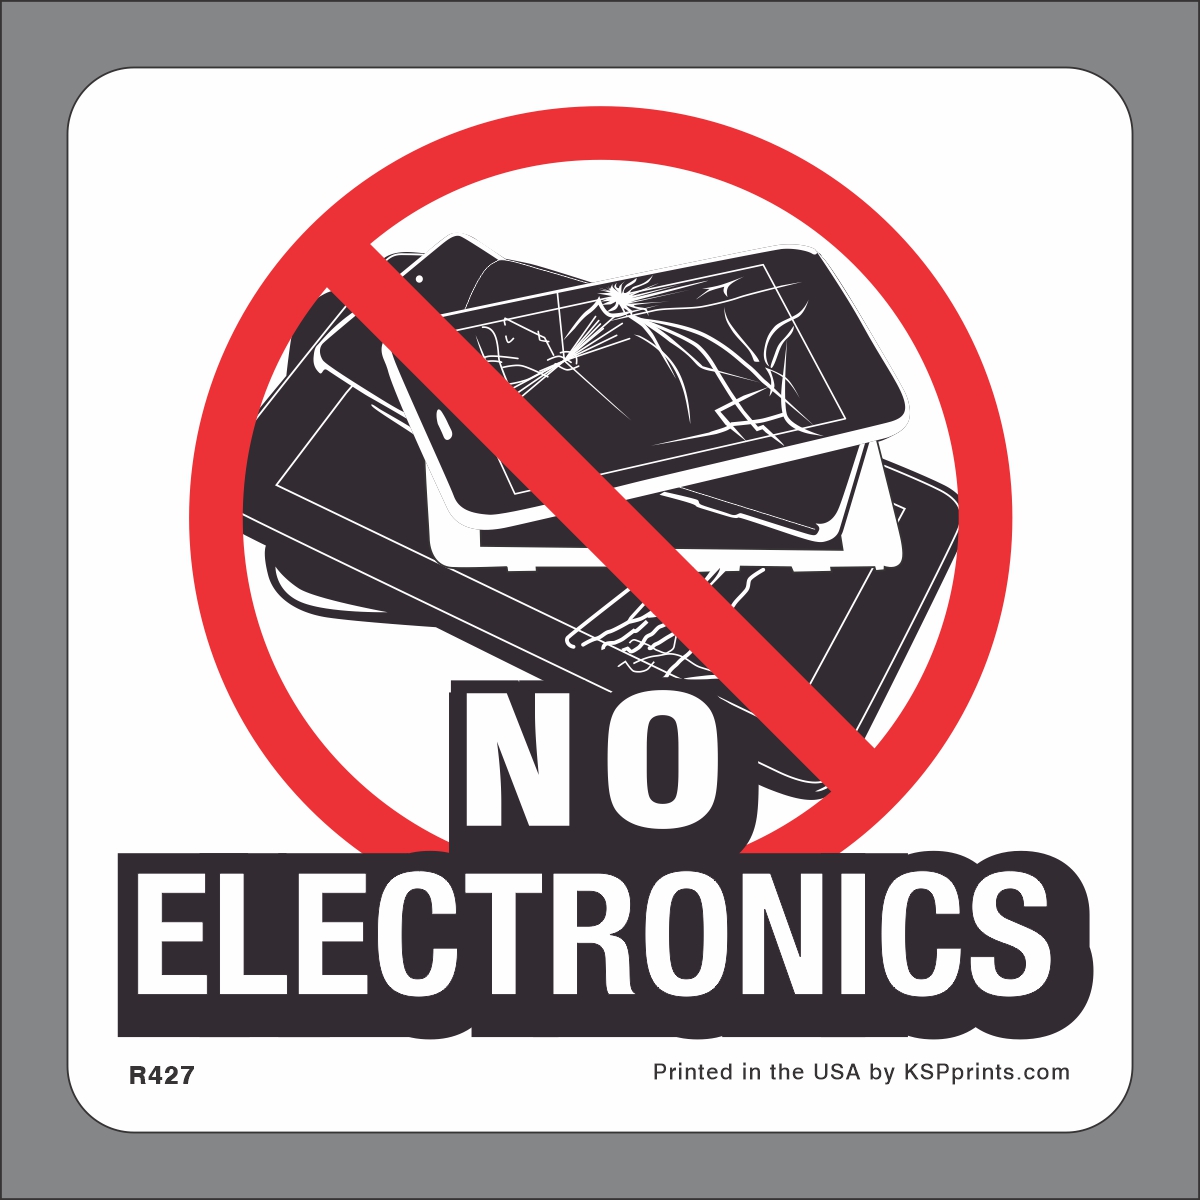 No Electronics Decals To Be Used To Keep Electronics Out of Your Bin